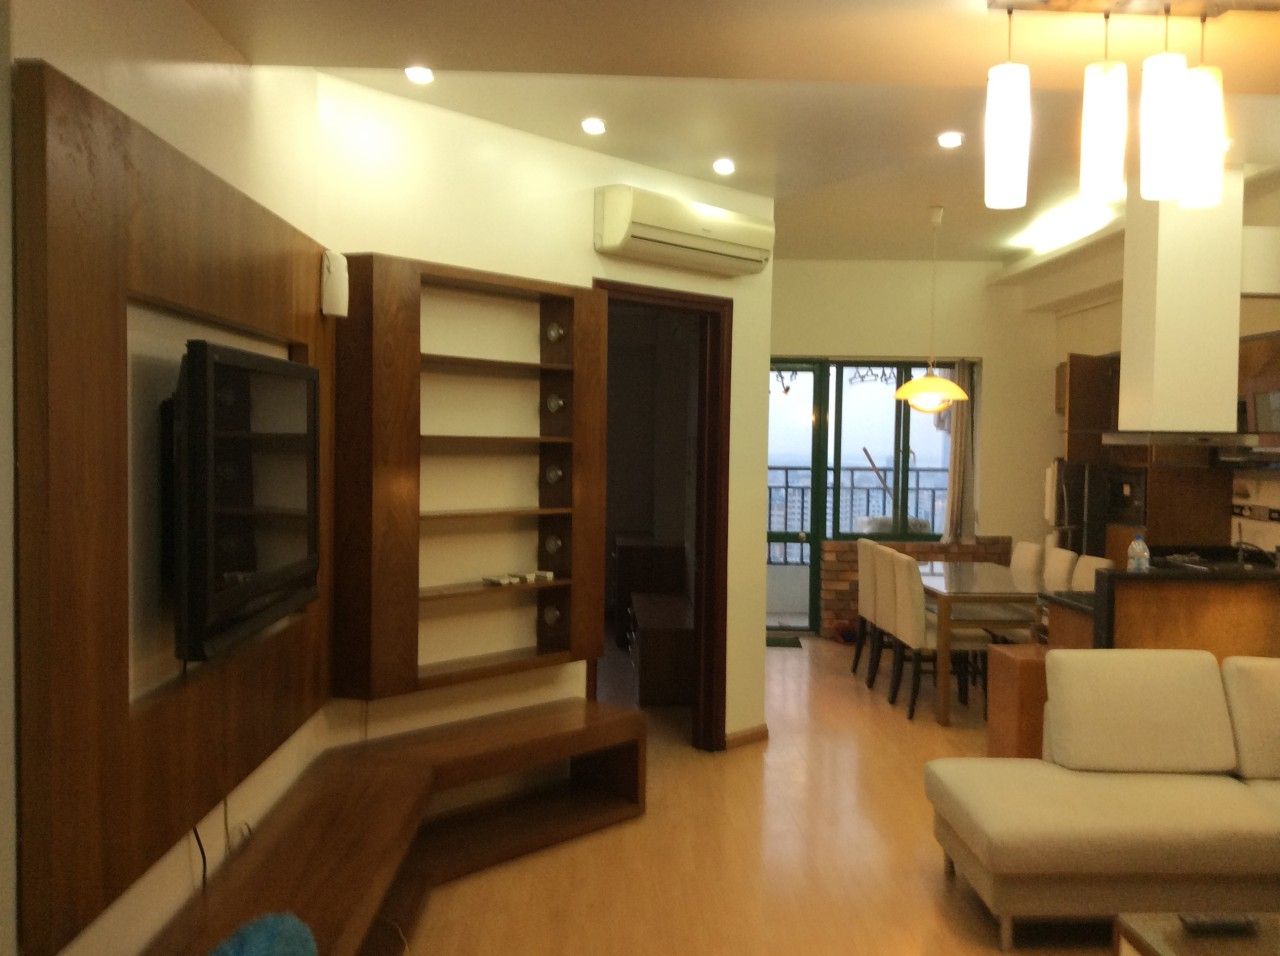 Fully equipped 3 bedroom apartment for rent in Kinh Do Building, Hai Ba Trung dist, Hanoi